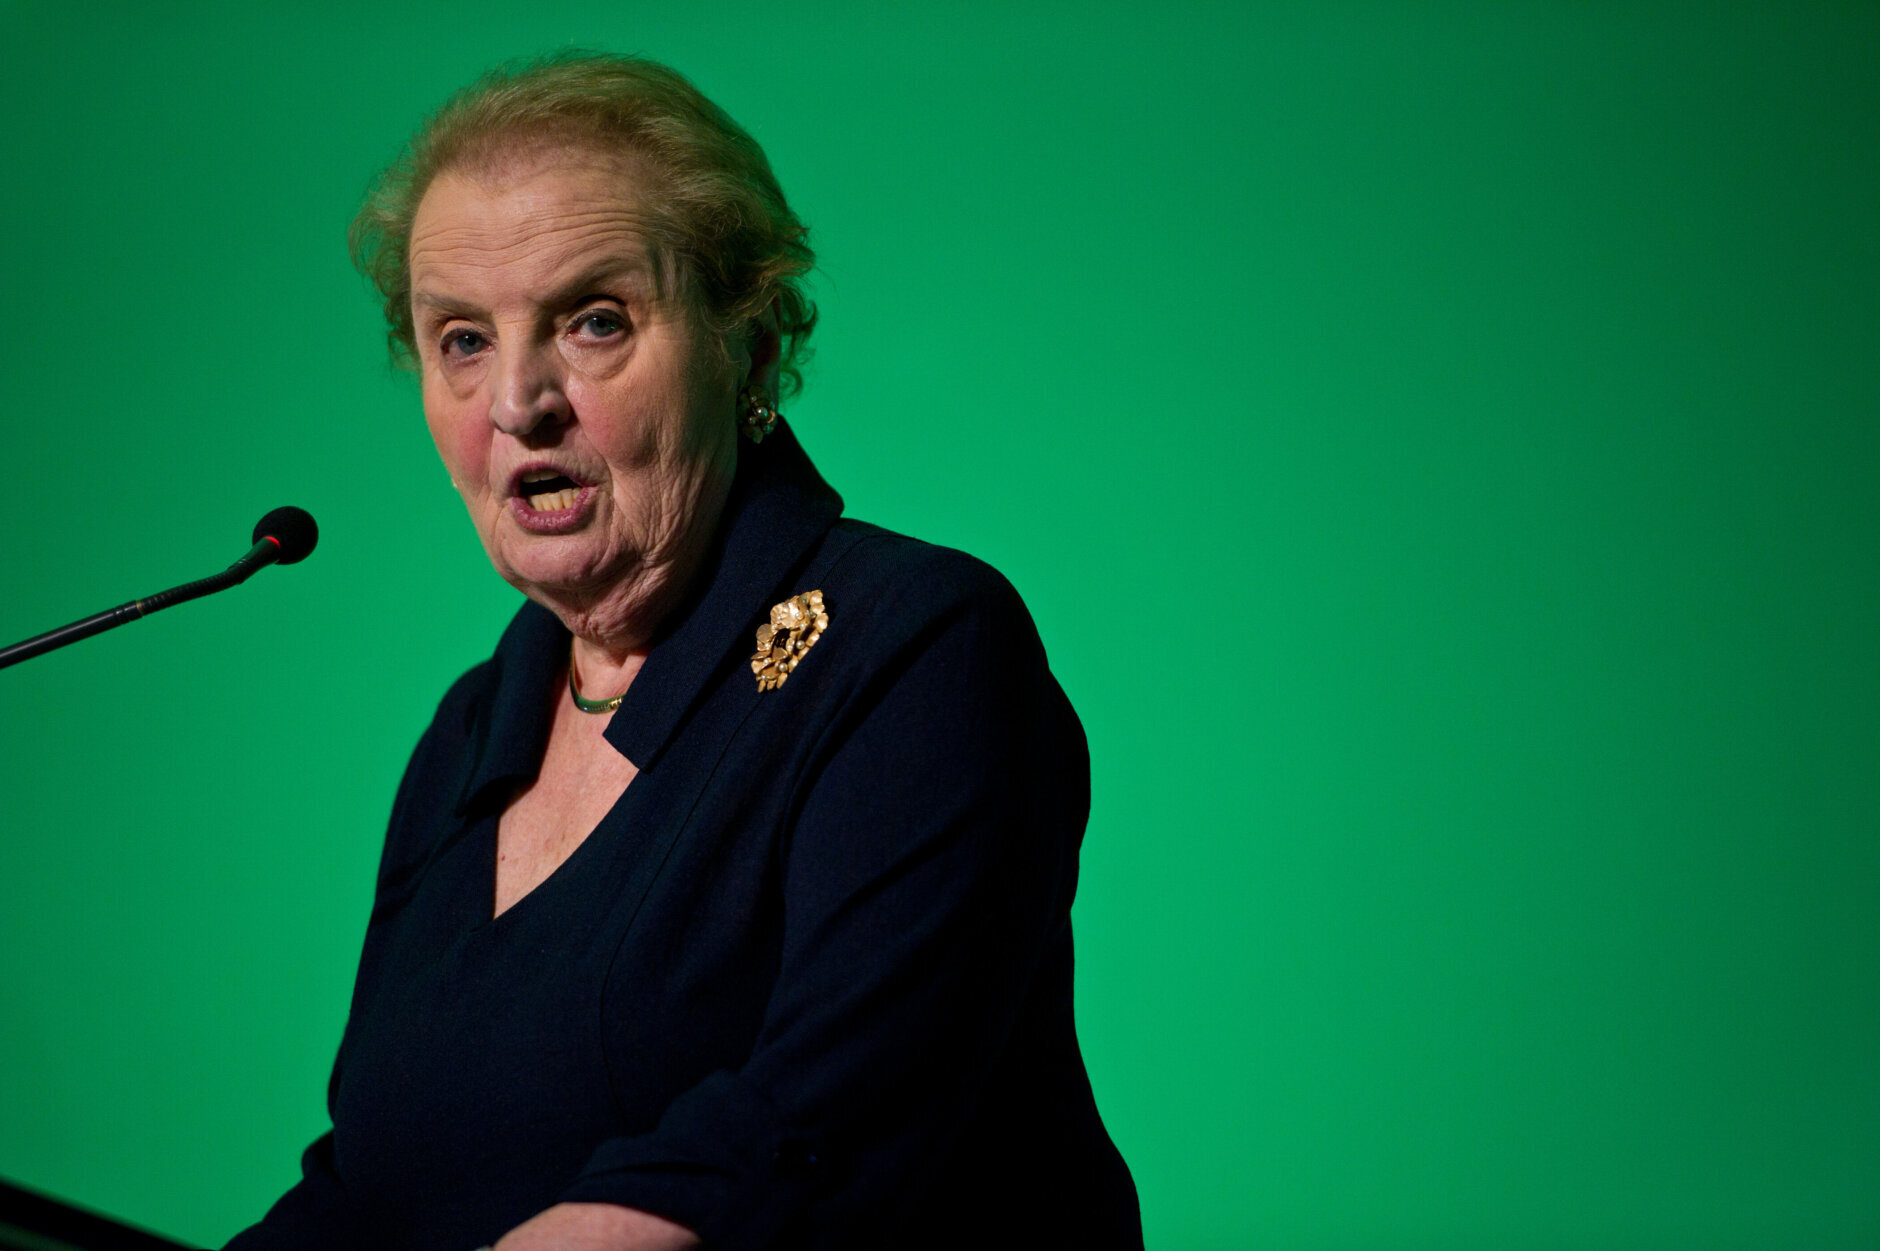 Former US Secretary of State Madeleine Albright delivers a speech during LIDE (Brazil’s Business Leadership Group) meeting in Sao Paulo, Brazil on October 14, 2011. AFP PHOTO/Yasuyoshi CHIBA (Photo credit should read YASUYOSHI CHIBA/AFP via Getty Images)